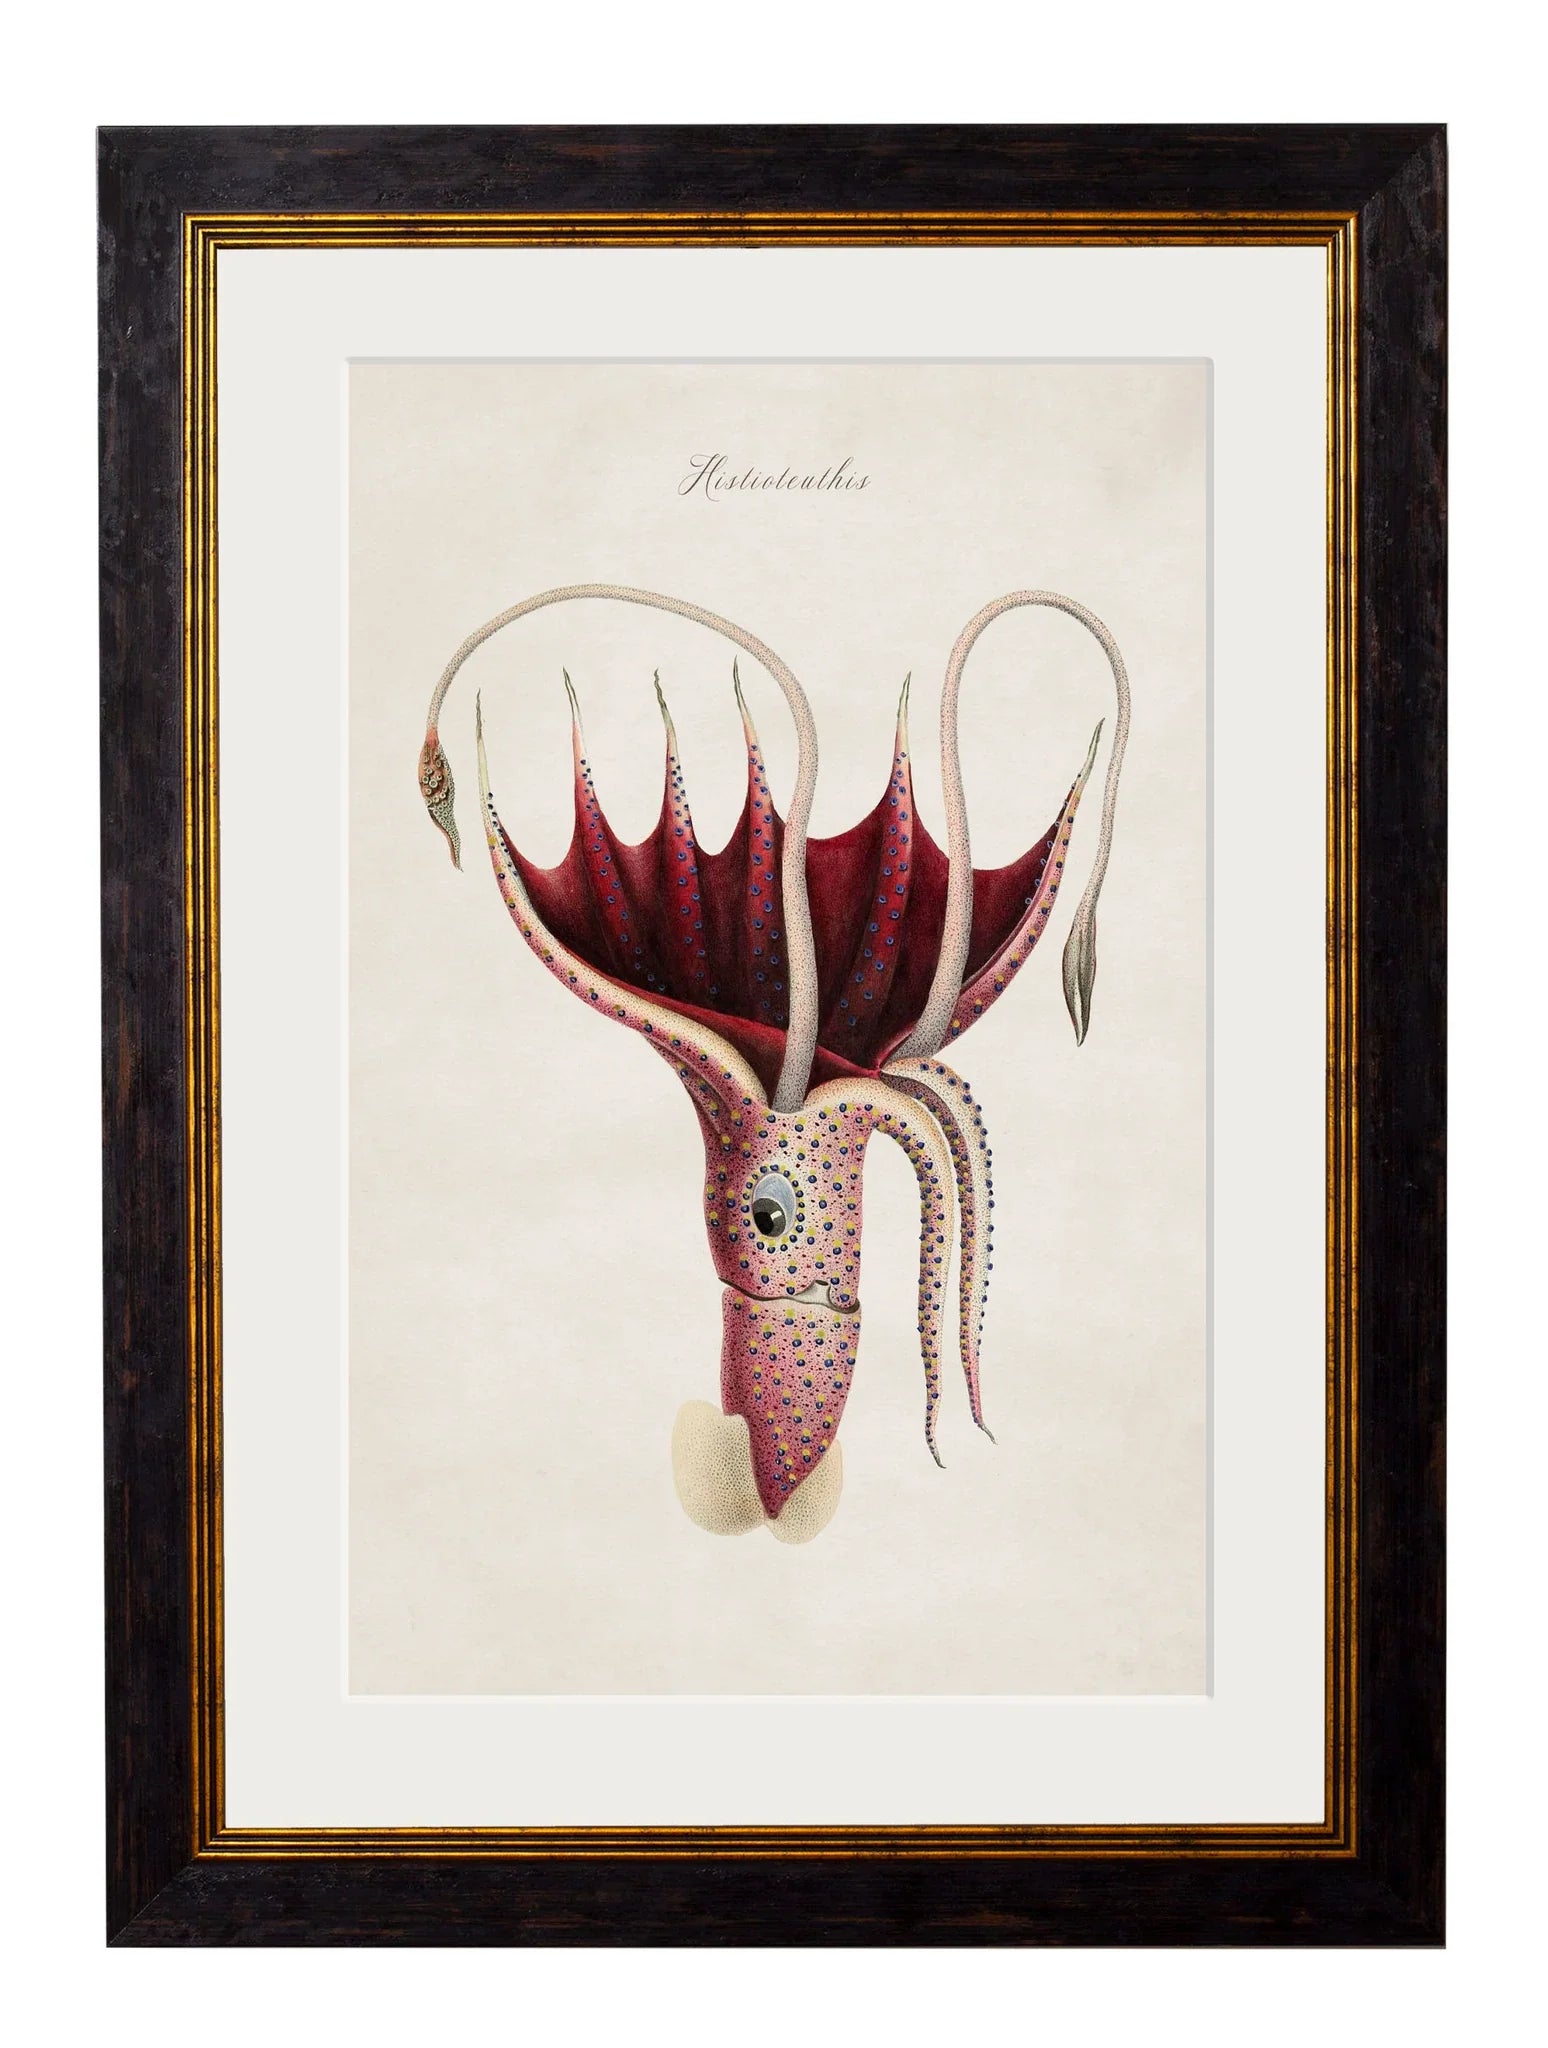 C.1876 Collection of Marine Animals Frames for sale - Woodcock and Cavendish